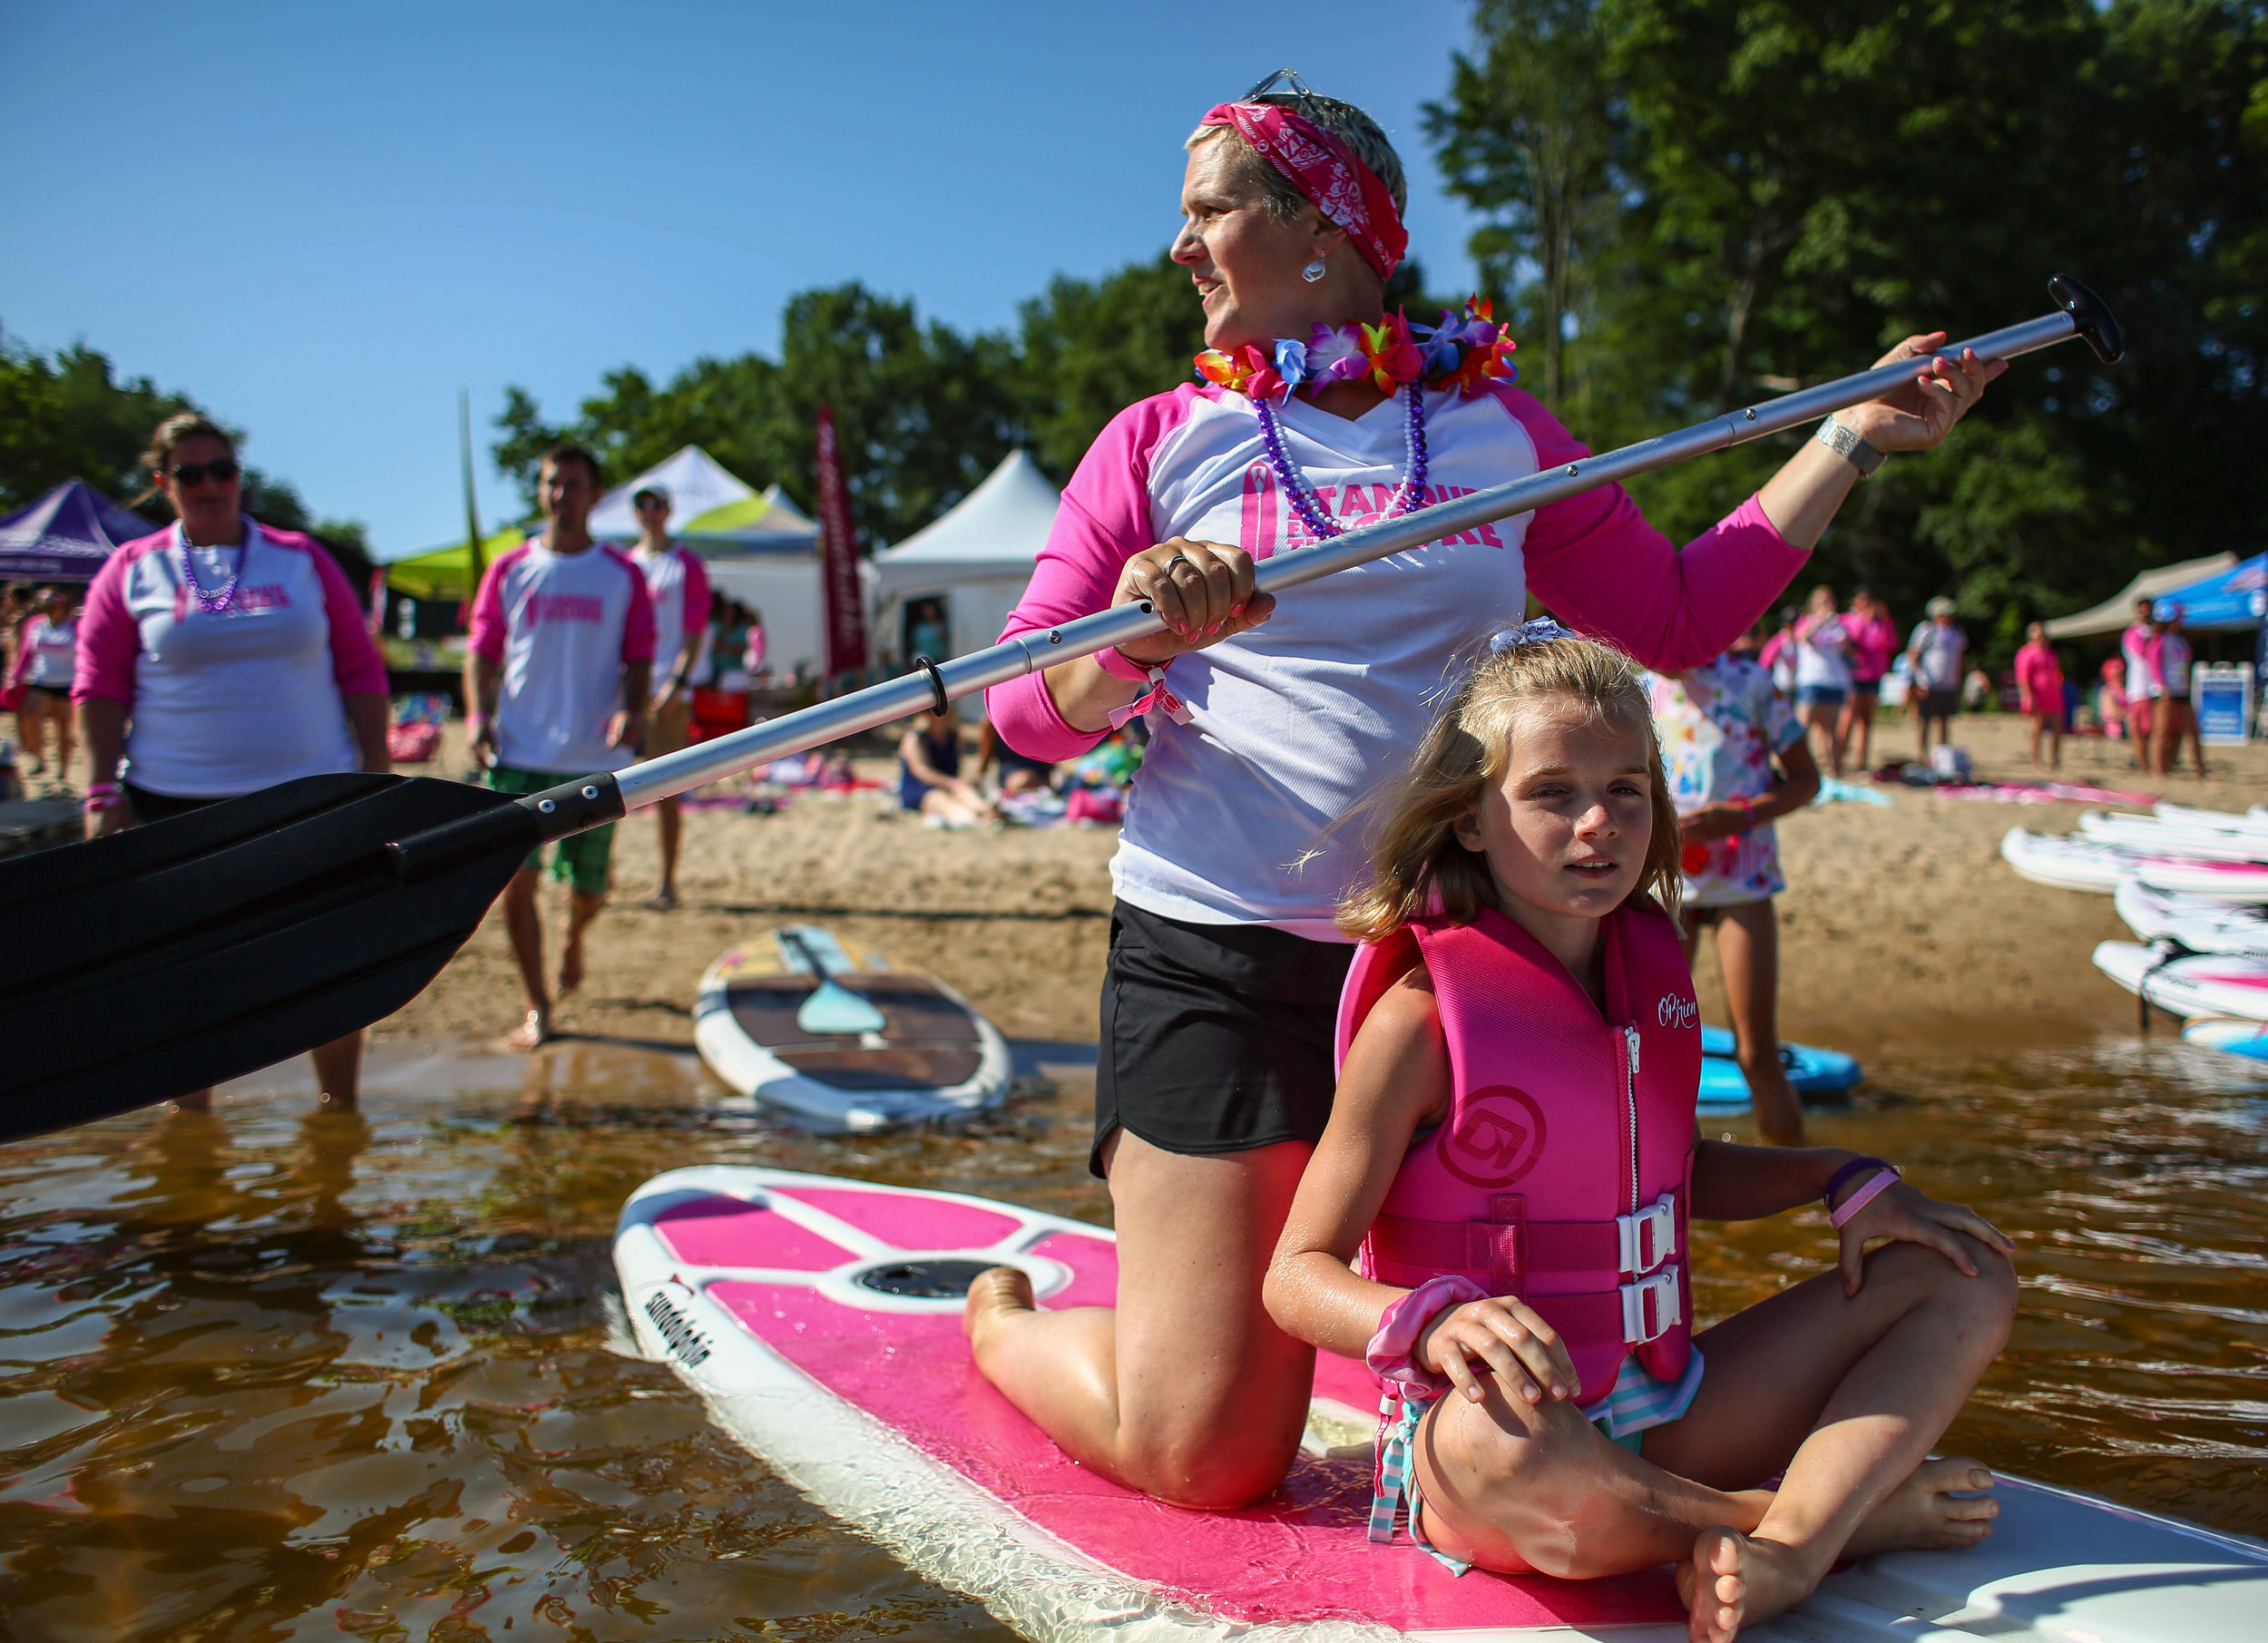  Amanda and her daughter Kayla paddle into Mona Lake along with hundreds of others during Saturday’s Stand Up for the Cure event in Norton Shores, Michigan on July 13, 2019. 